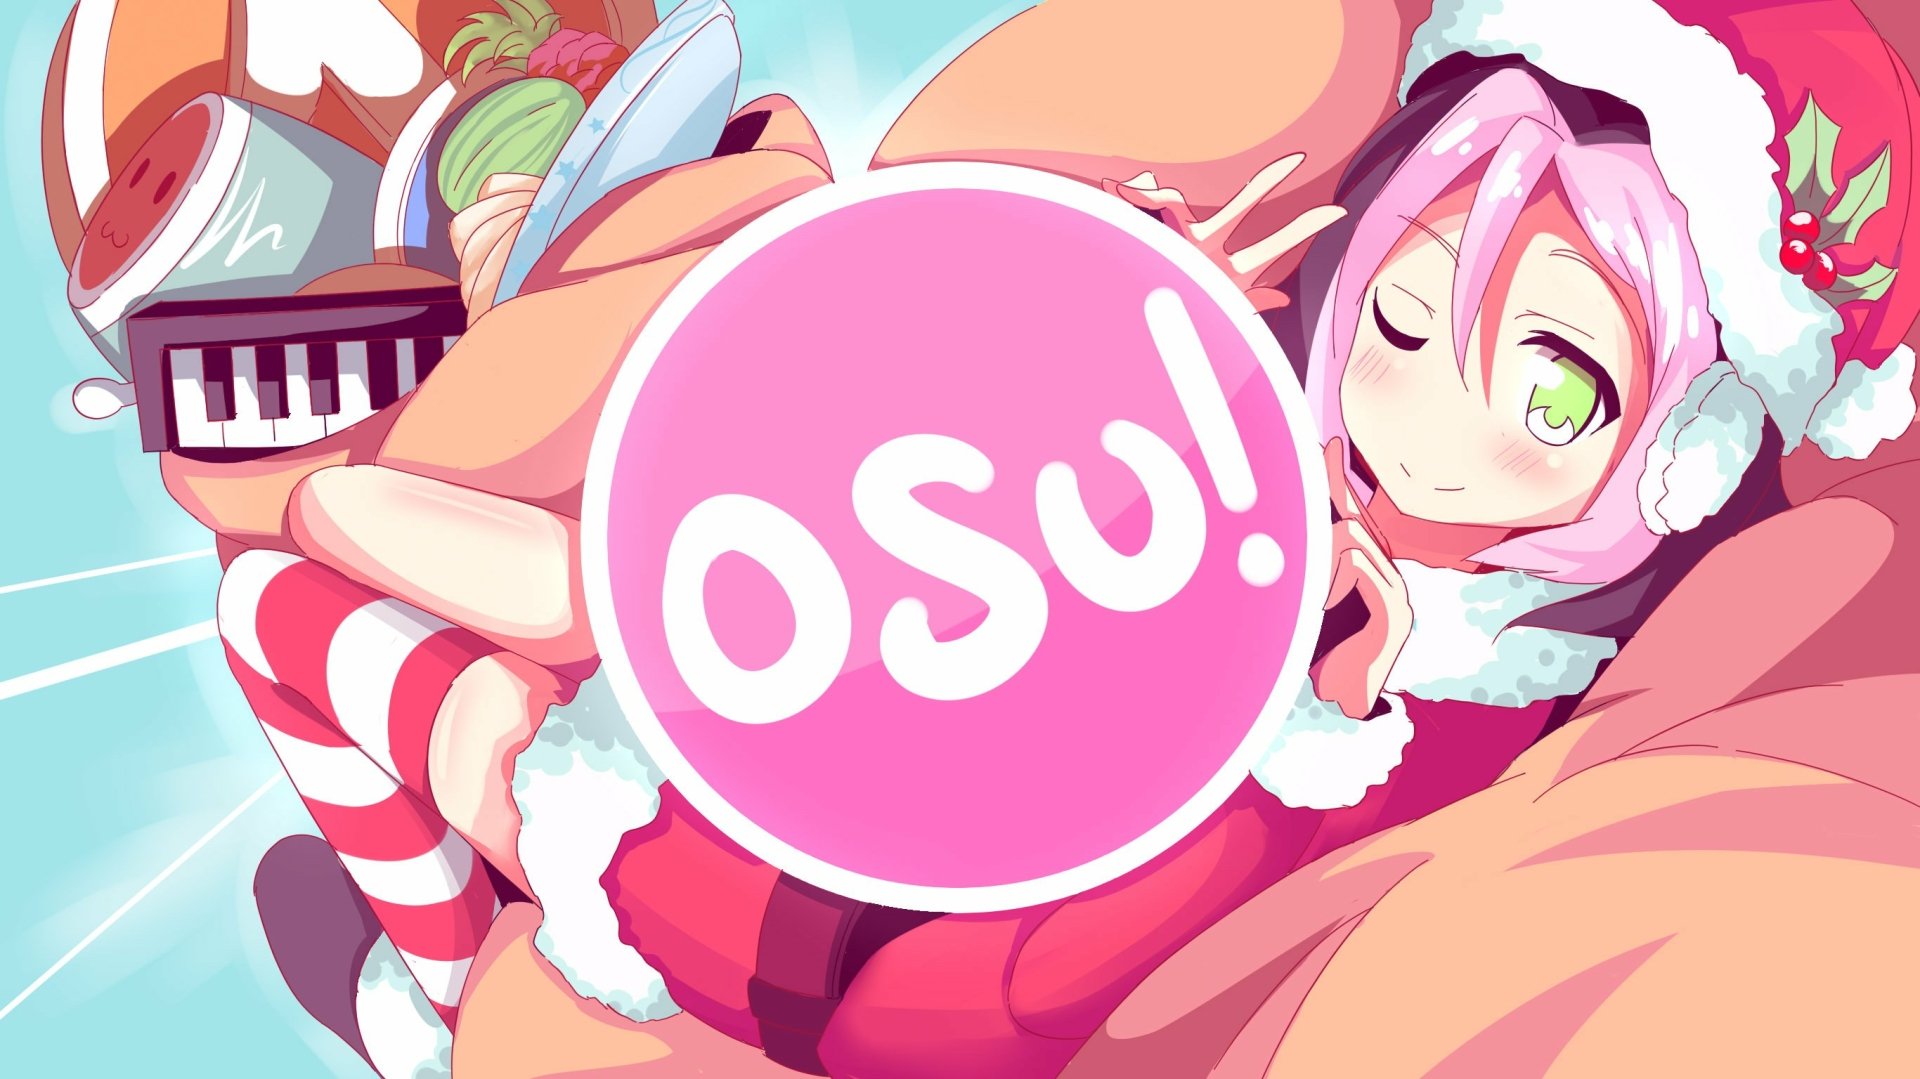 Osu wallpaper by Dilan876 - Download on ZEDGE™